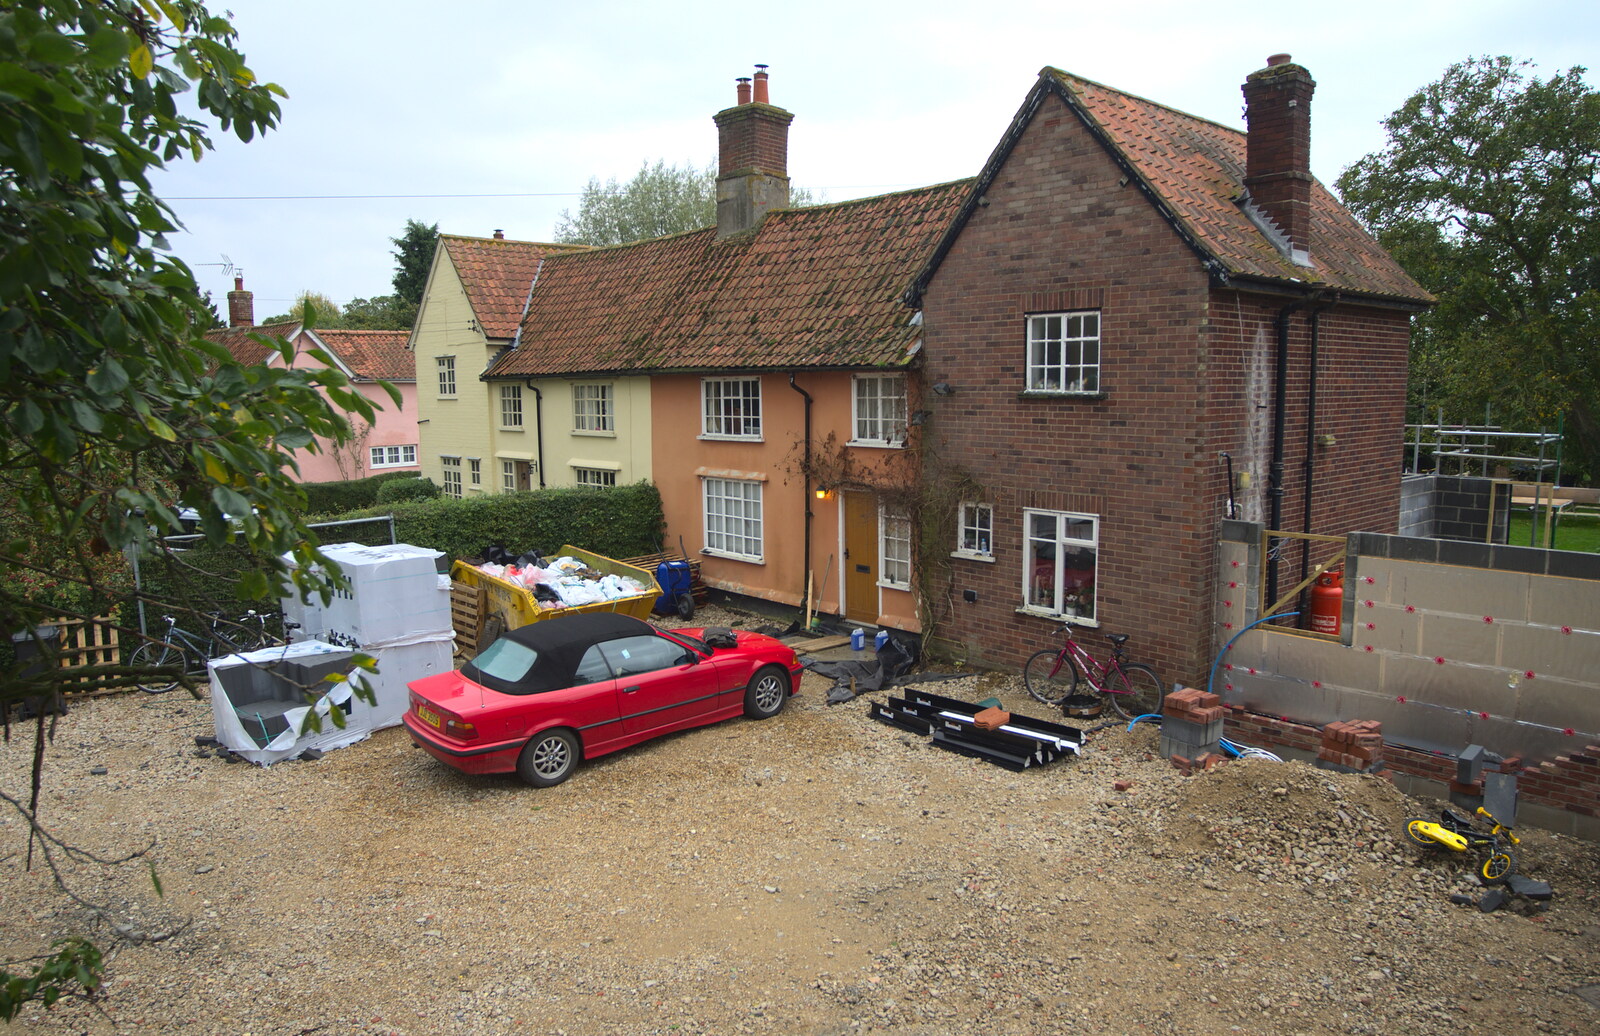 A view of the house from the scaffolding from A Building Site Update, Brome, Suffolk - 13th October 2013